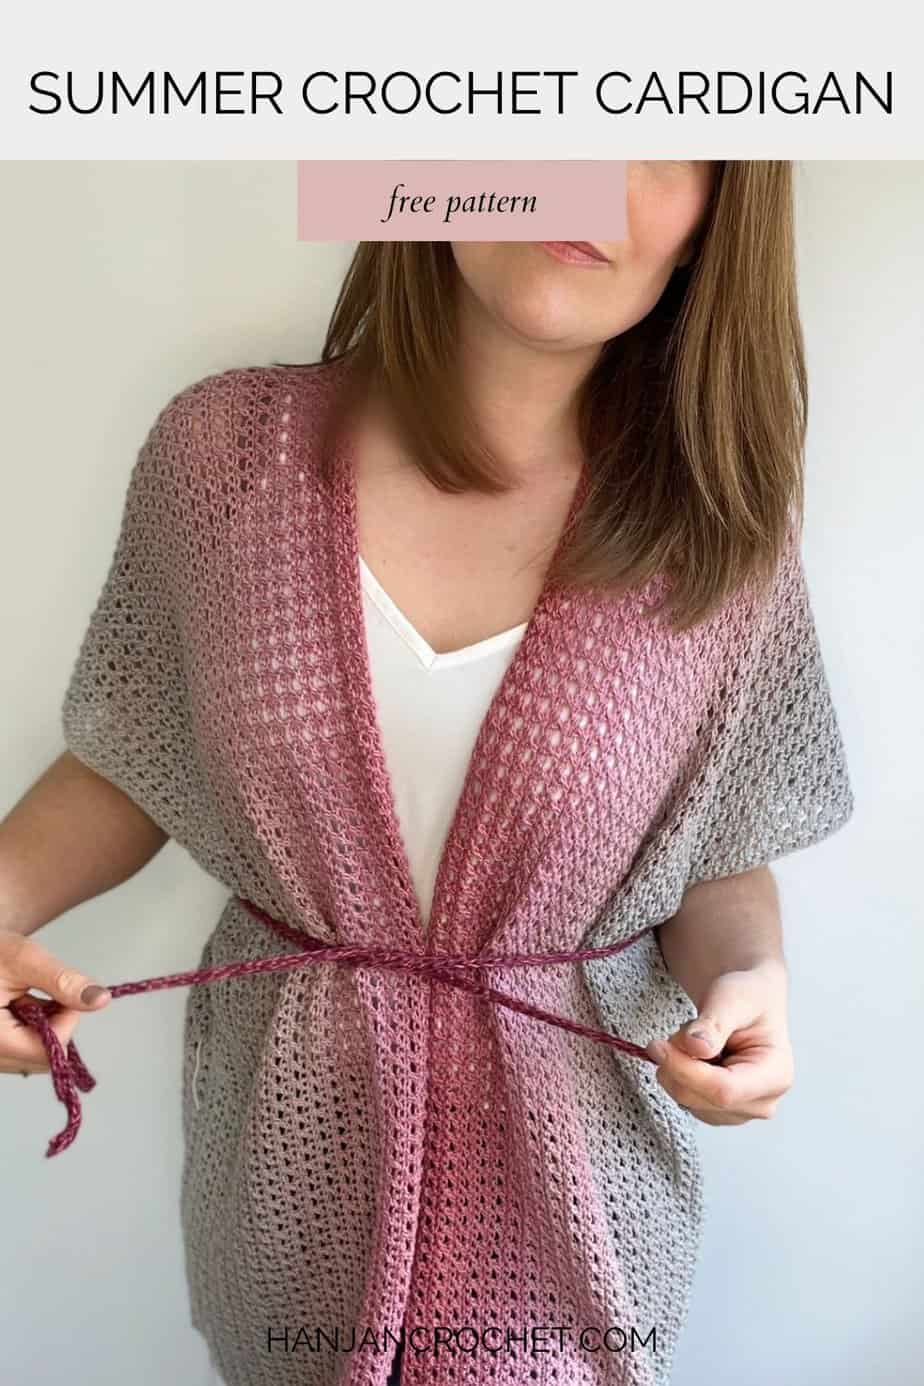 Best Summer Crochet Patterns and Projects for 2022